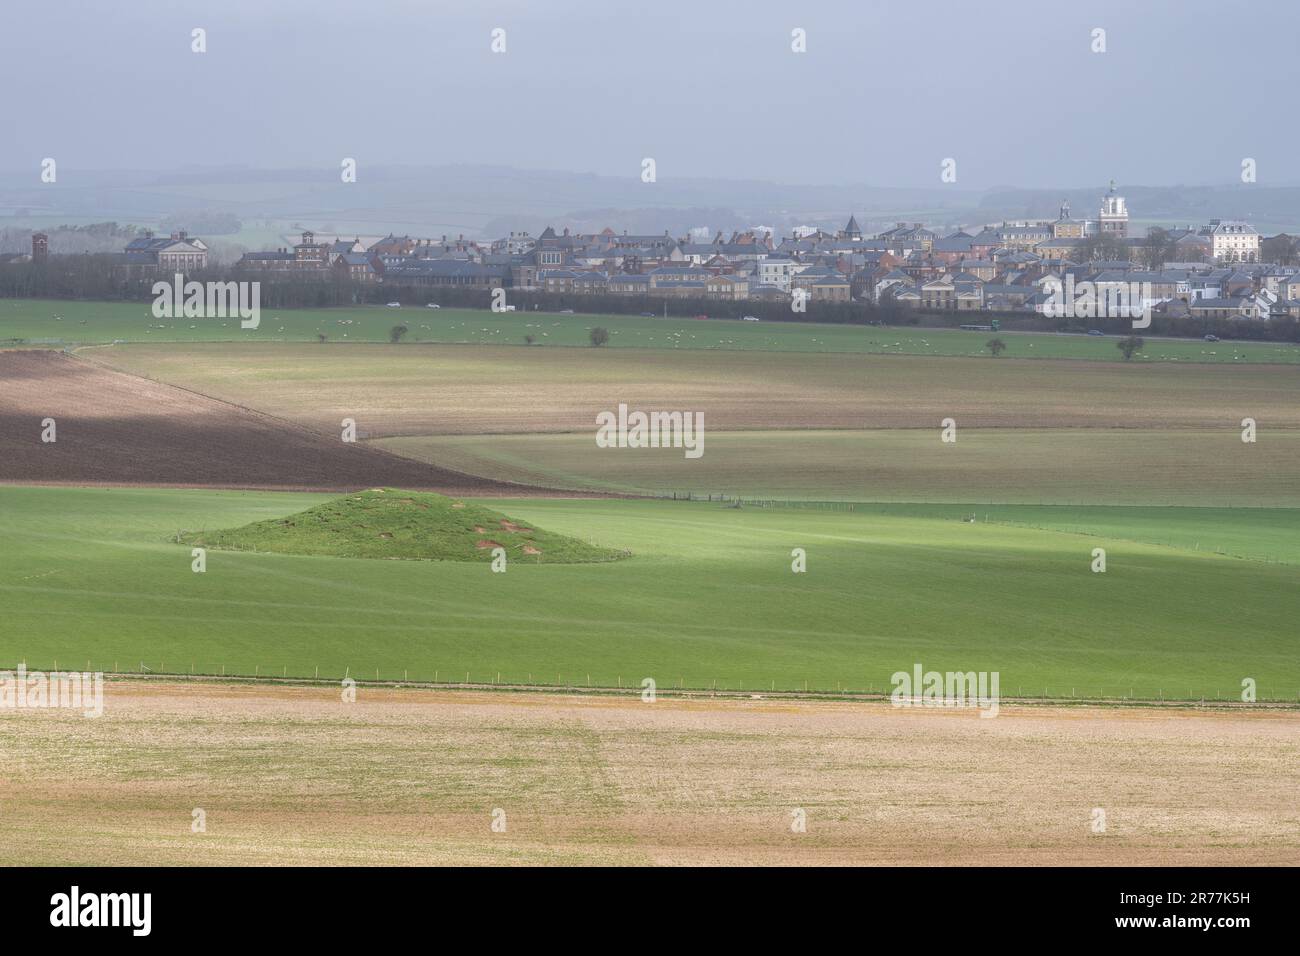 An ancient tumulus burial mound stands in a field below Maiden Castle in Dorset, with Poundbury new town in the distance. Stock Photo